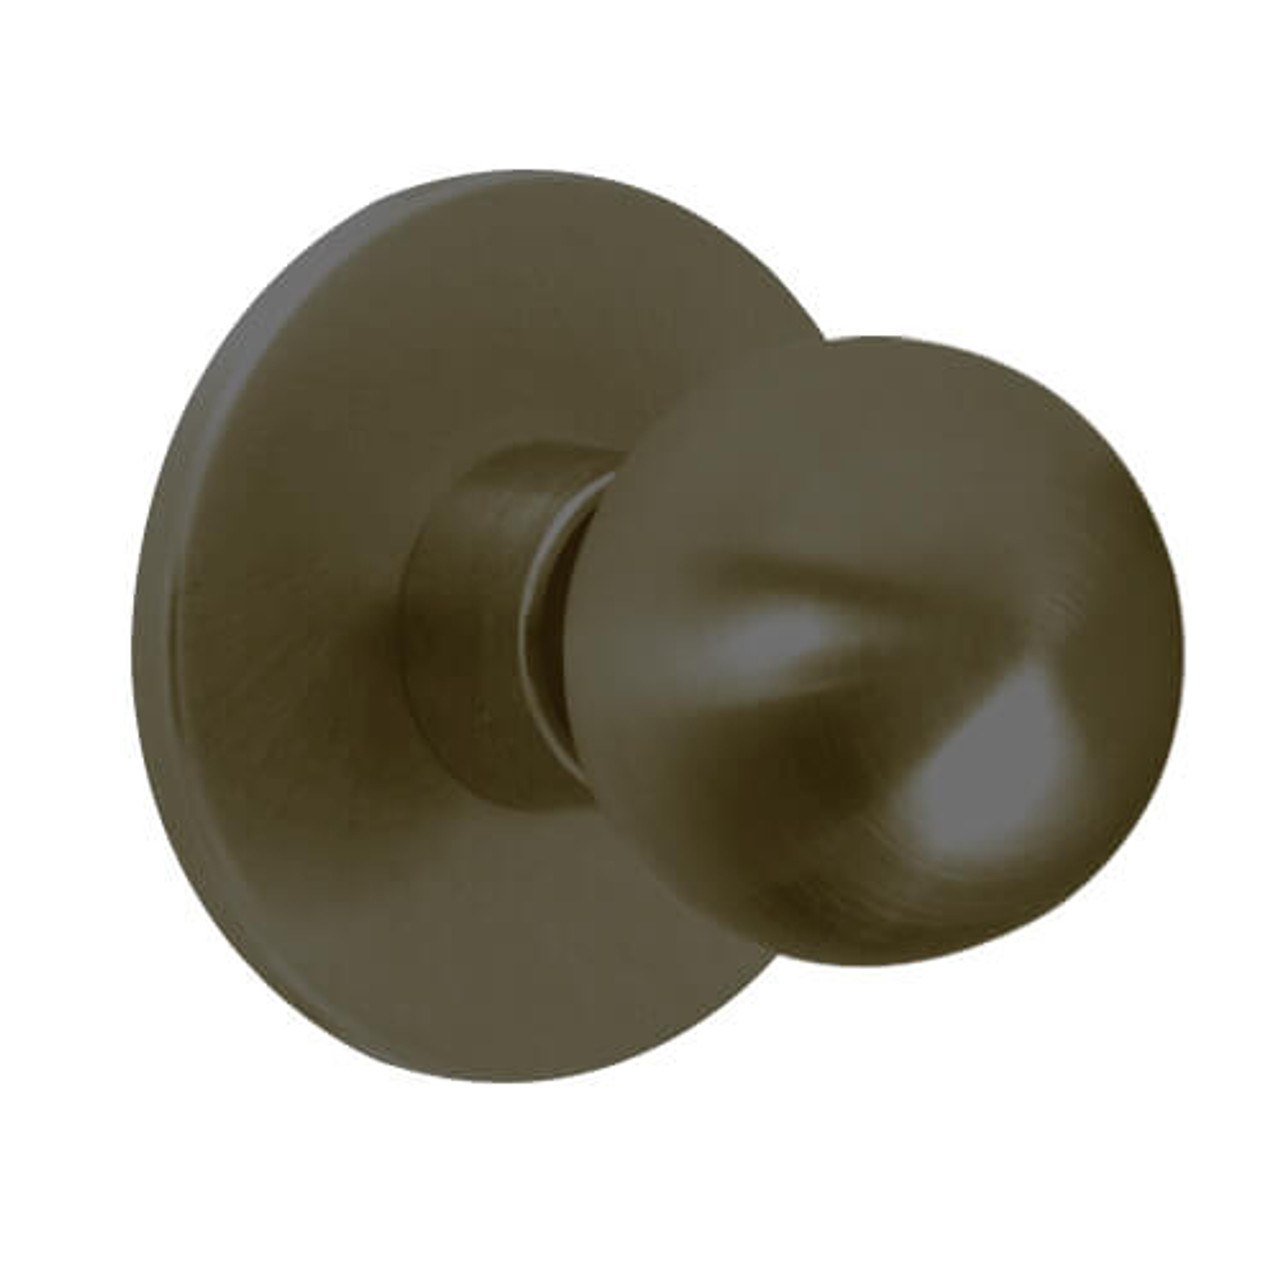 X101S-HY-613 Falcon X Series Cylindrical Passage Lock with Hana-York Knob Style in Oil Rubbed Bronze Finish